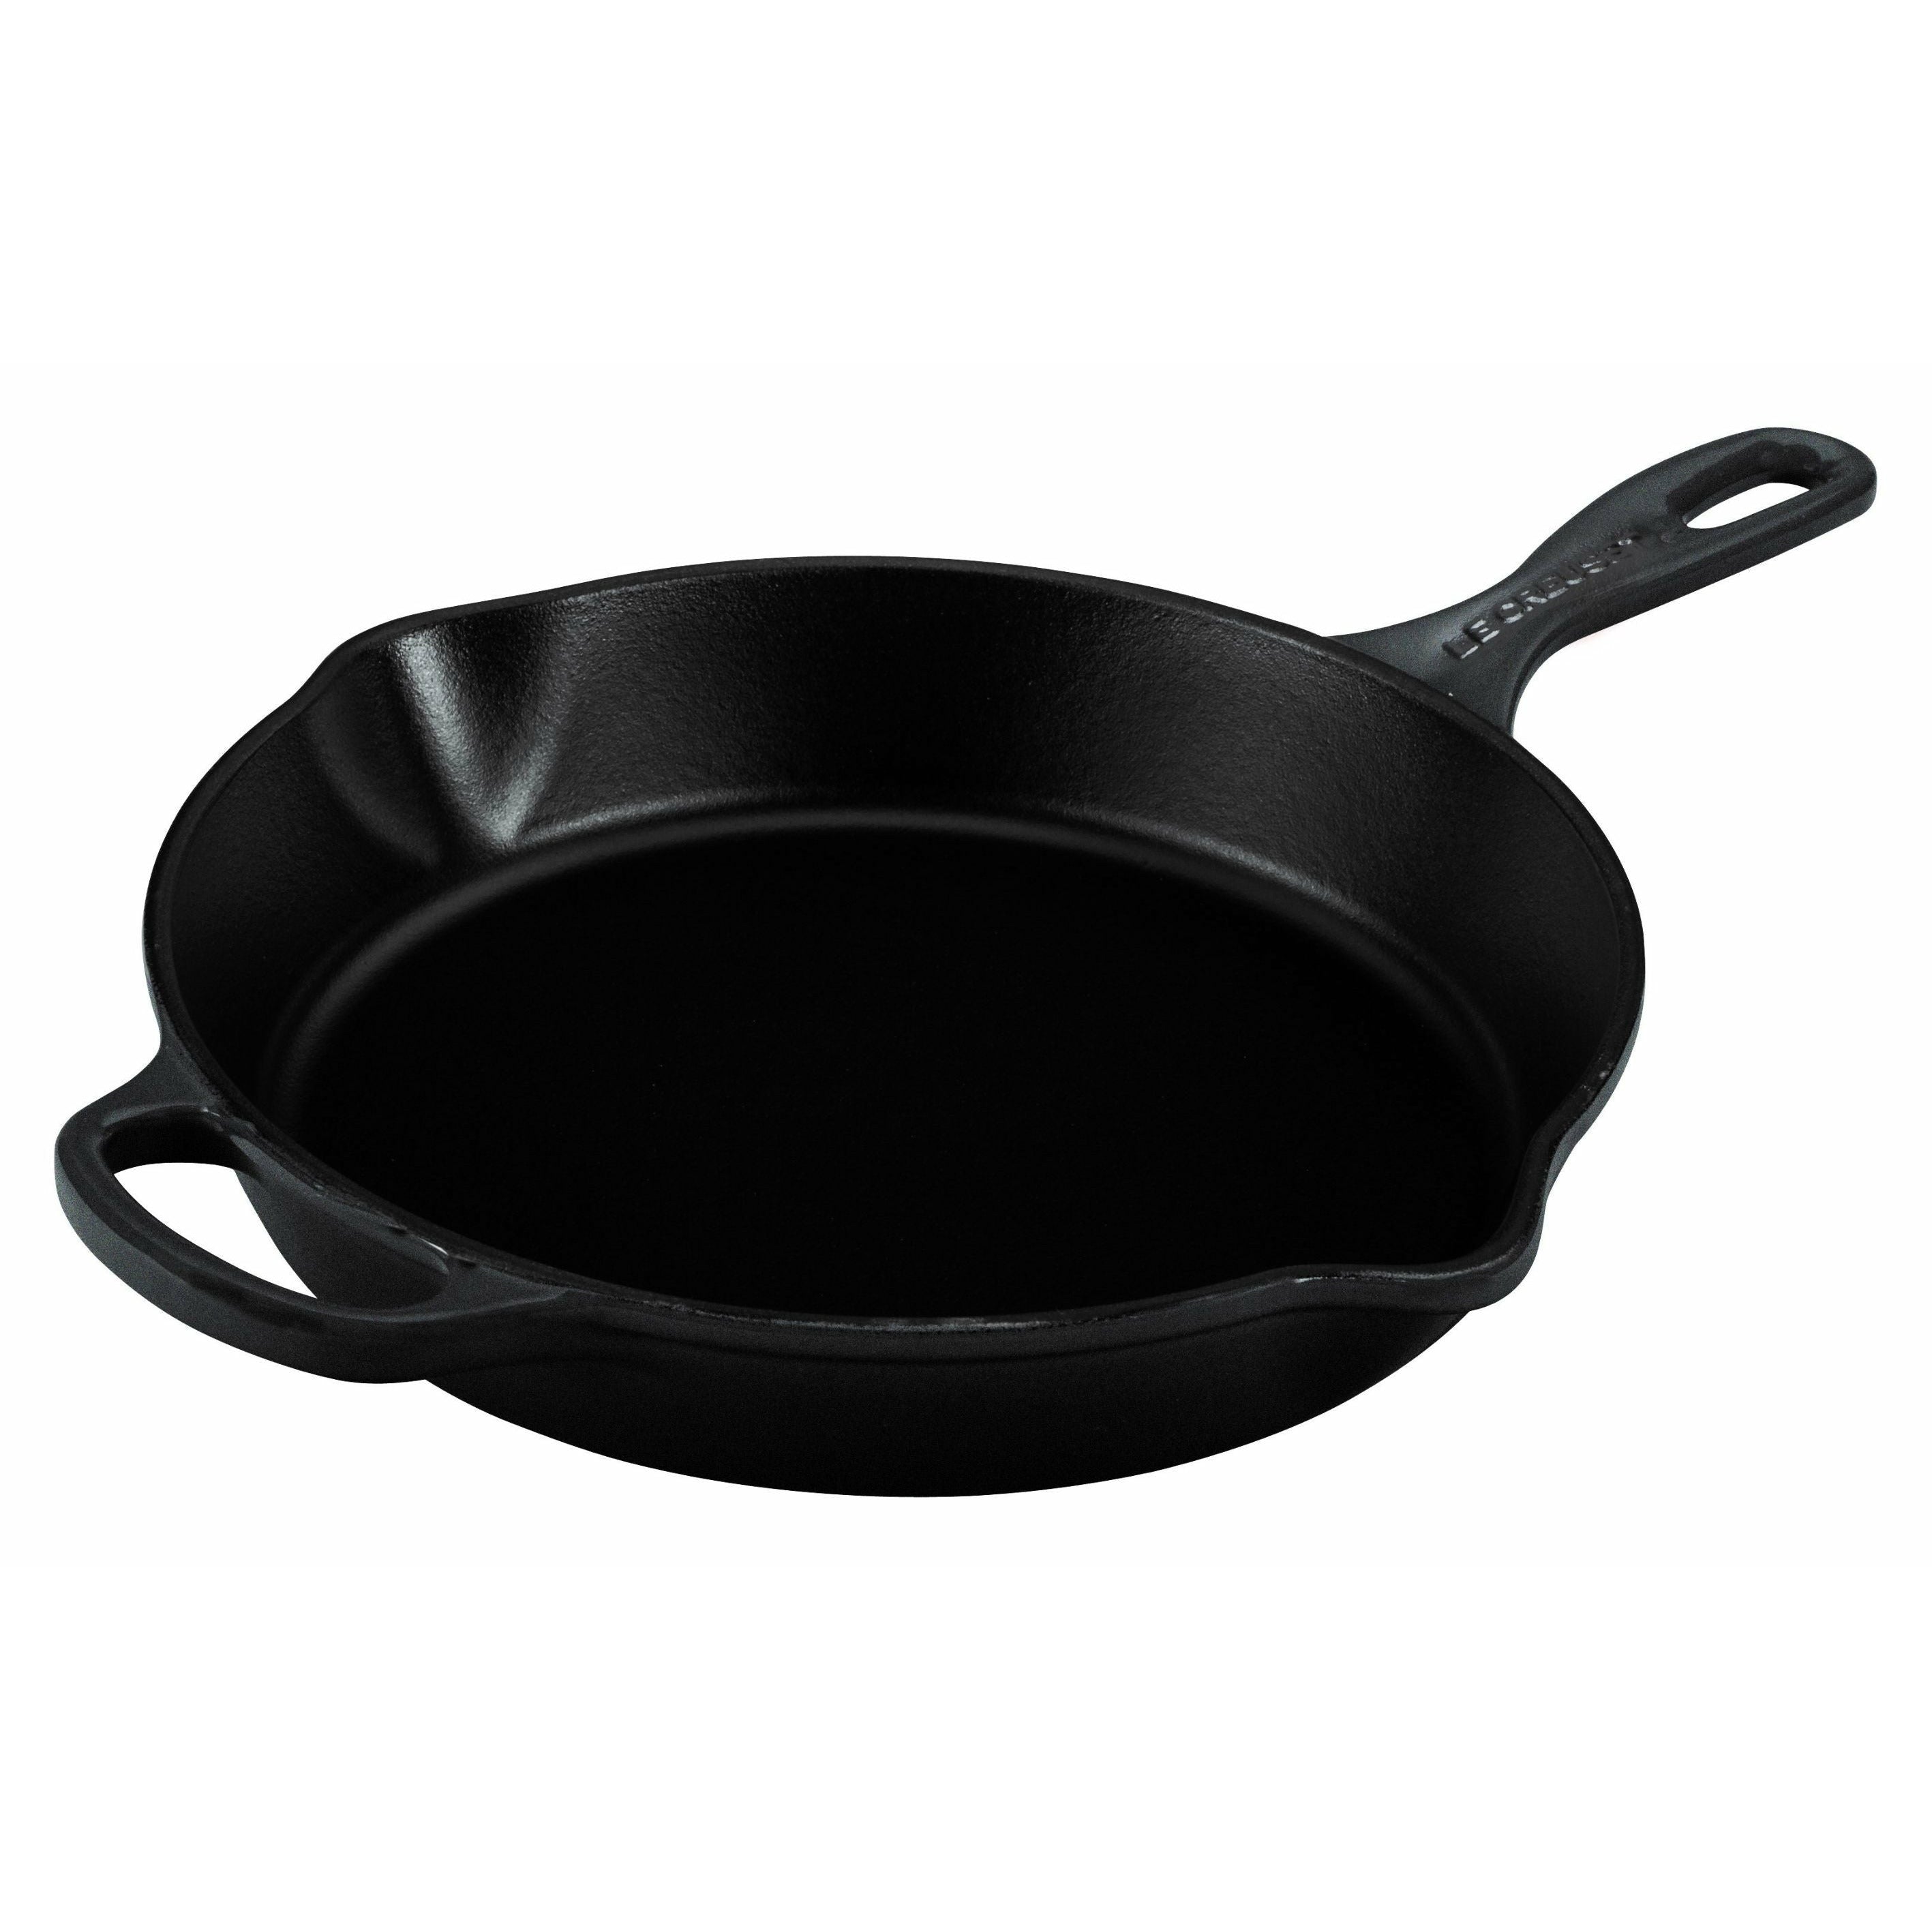 Le Creuset Nature High High Frying and Forming Pan 26厘米，黑色